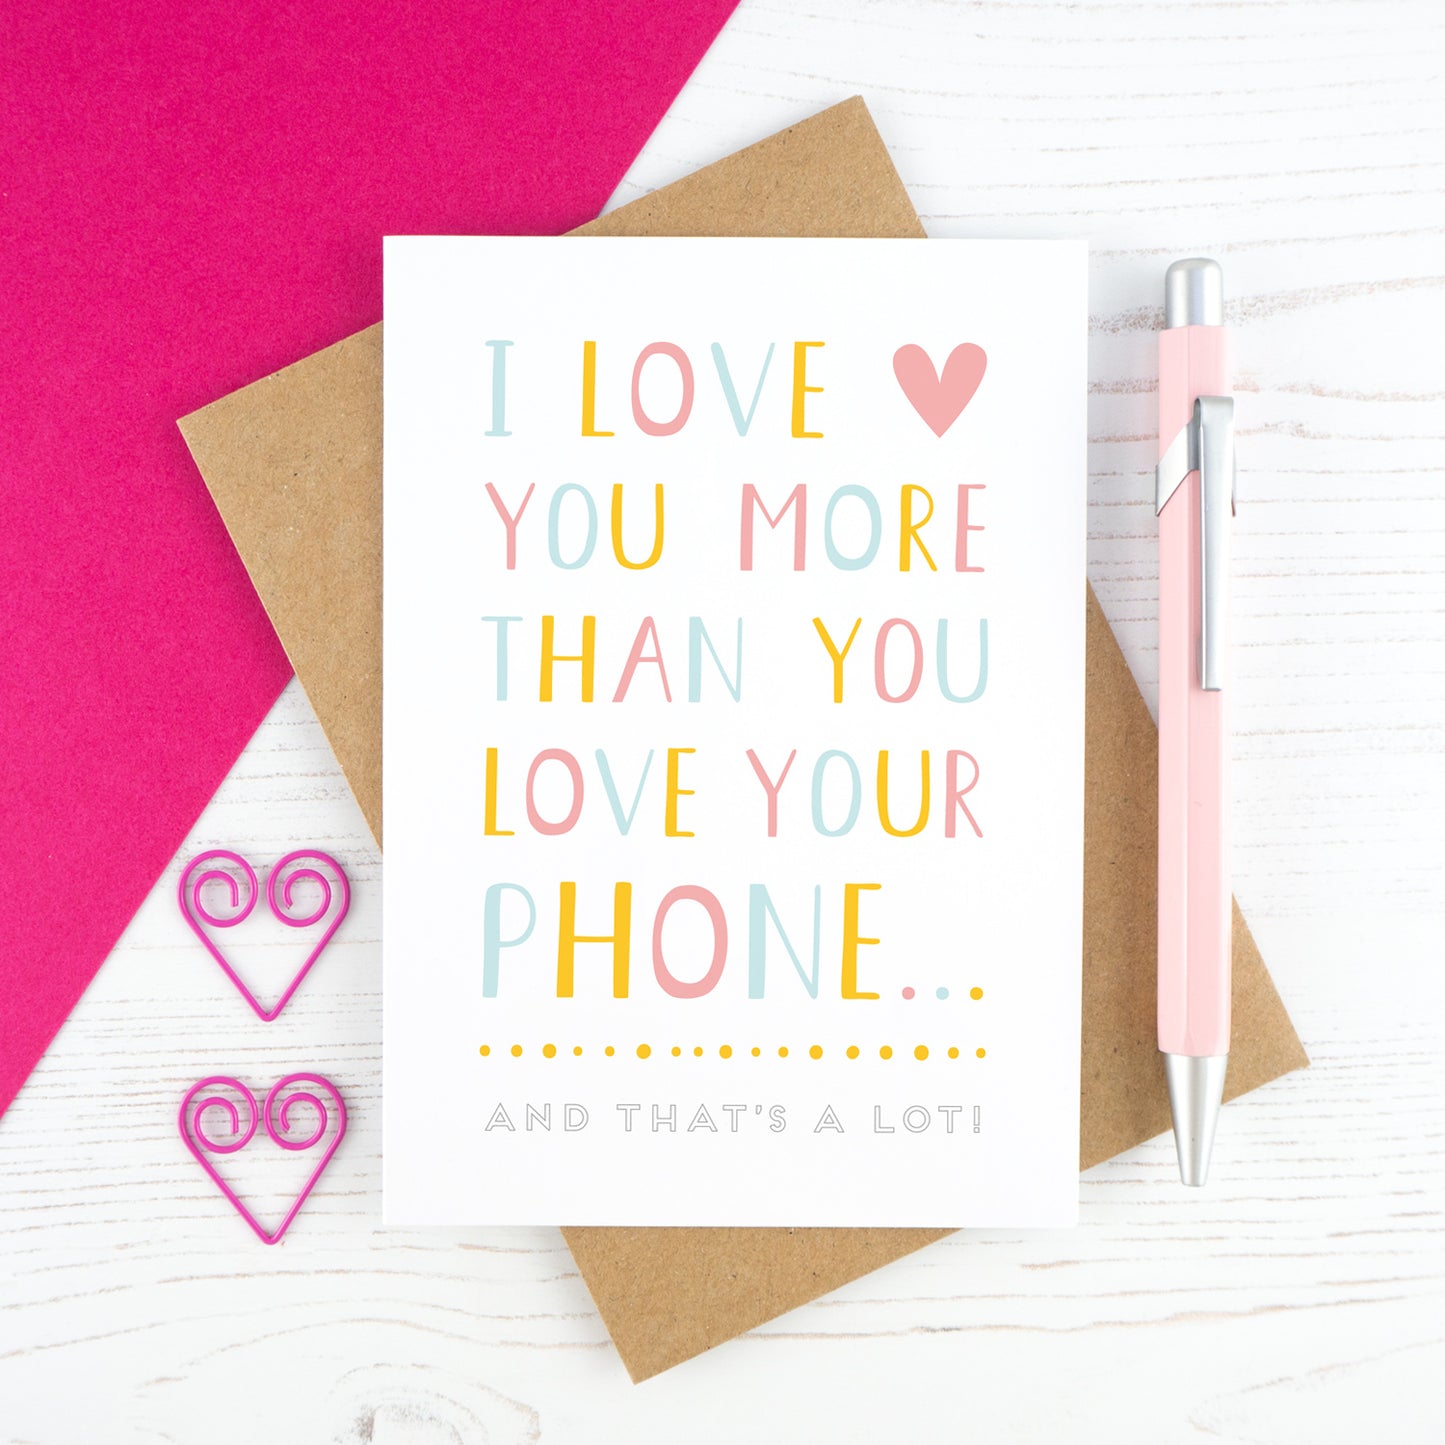 I love you more than you love your phone card - multi coloured